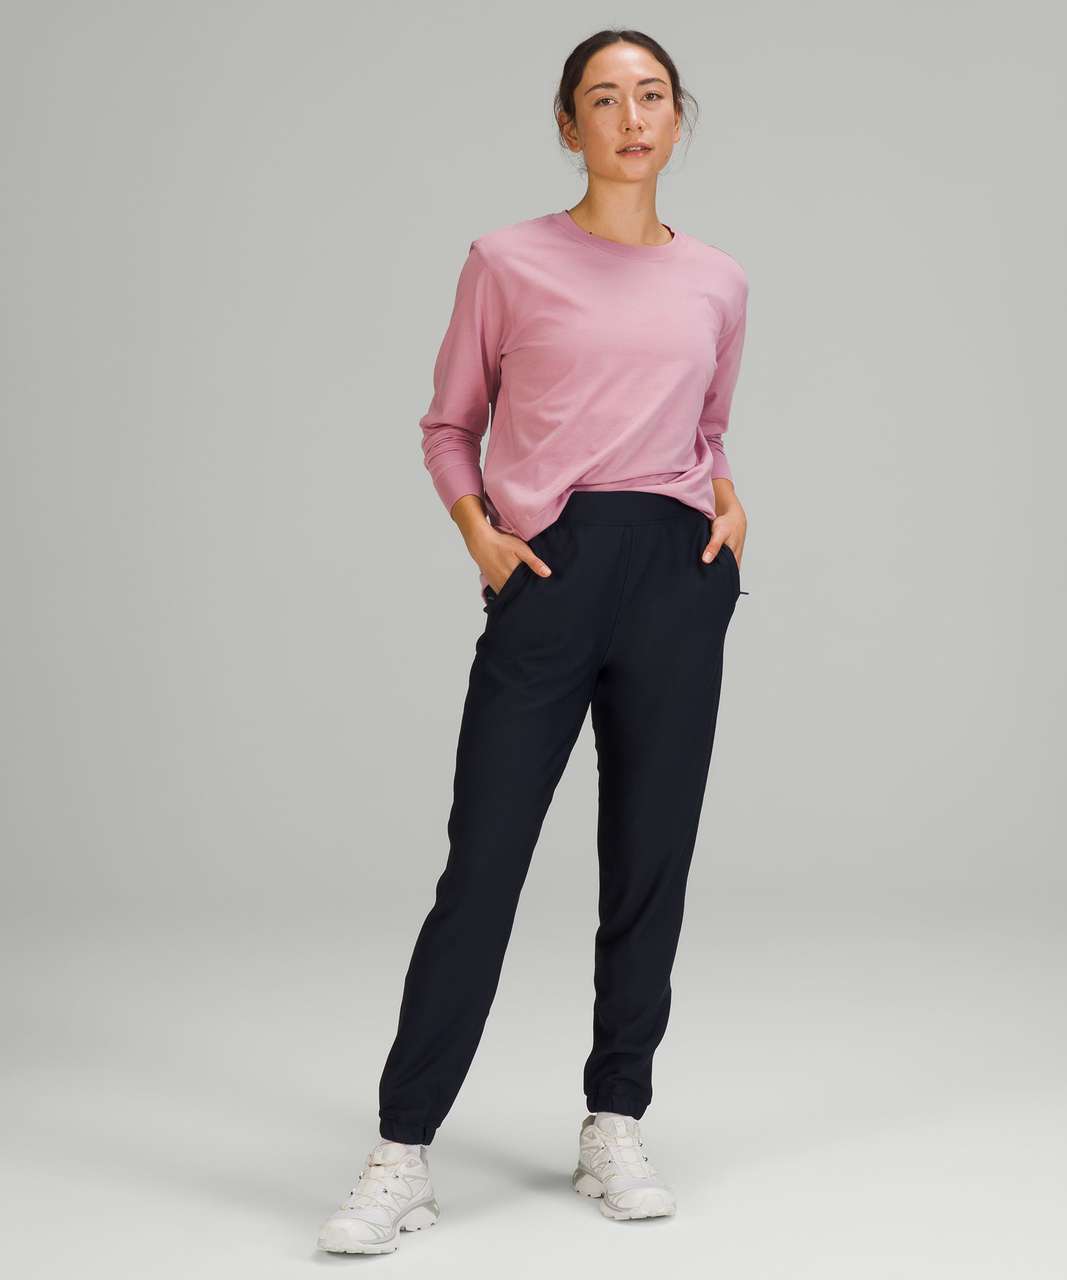 Lululemon All Yours Long Sleeve Shirt - Pink Taupe